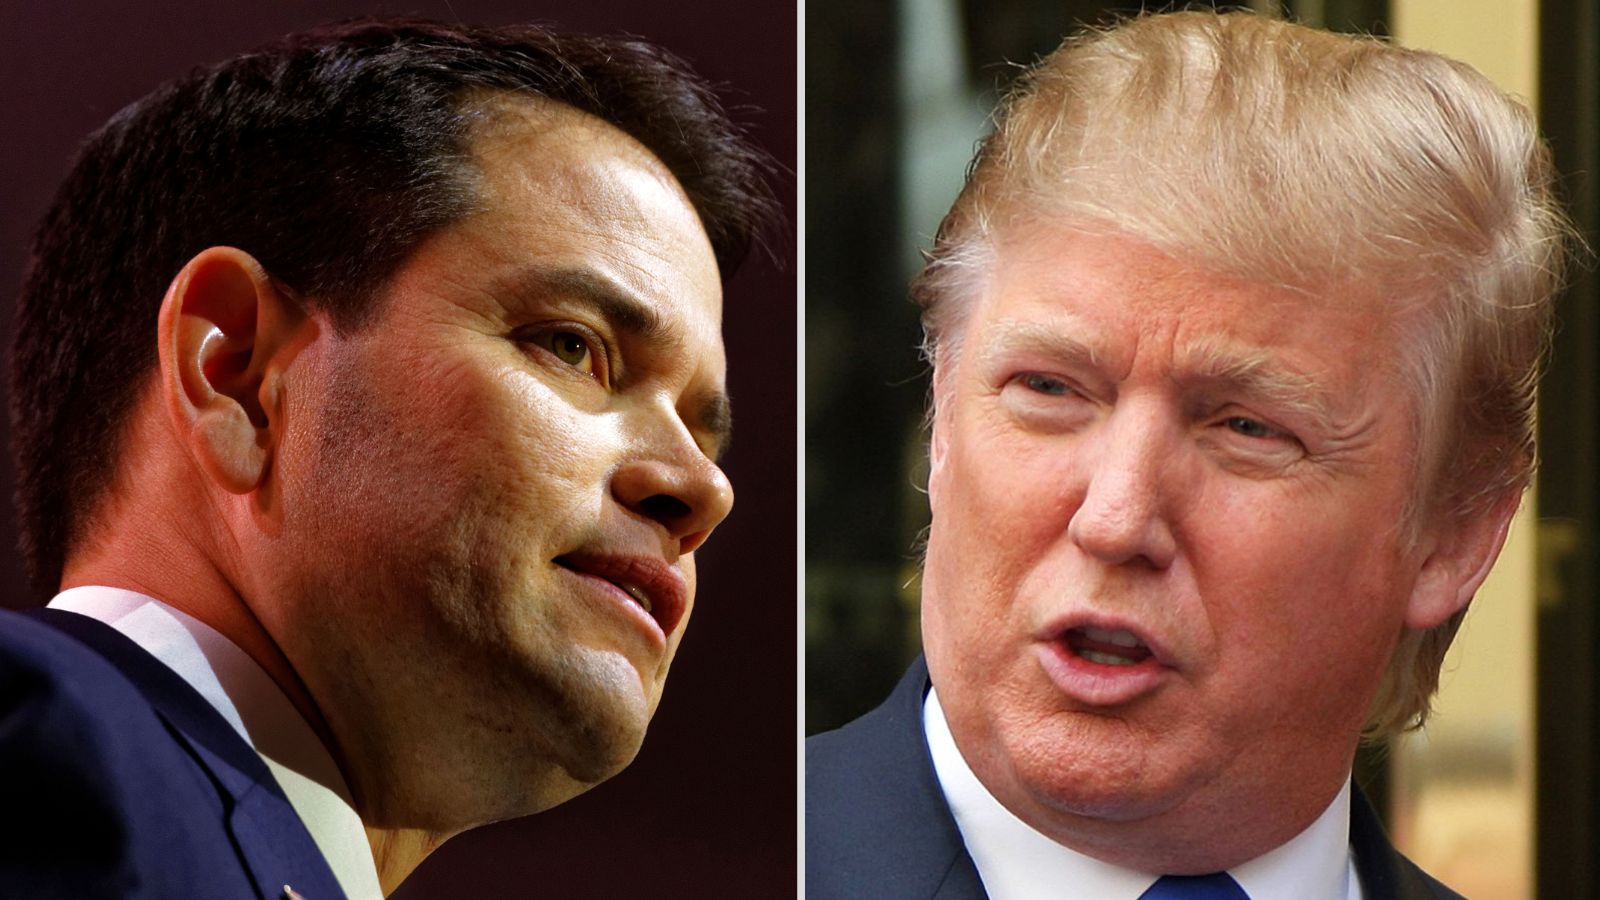 ”He Was the Laughingstock of the World”: Sen. Rubio Shares Divisive Opinions on Trump